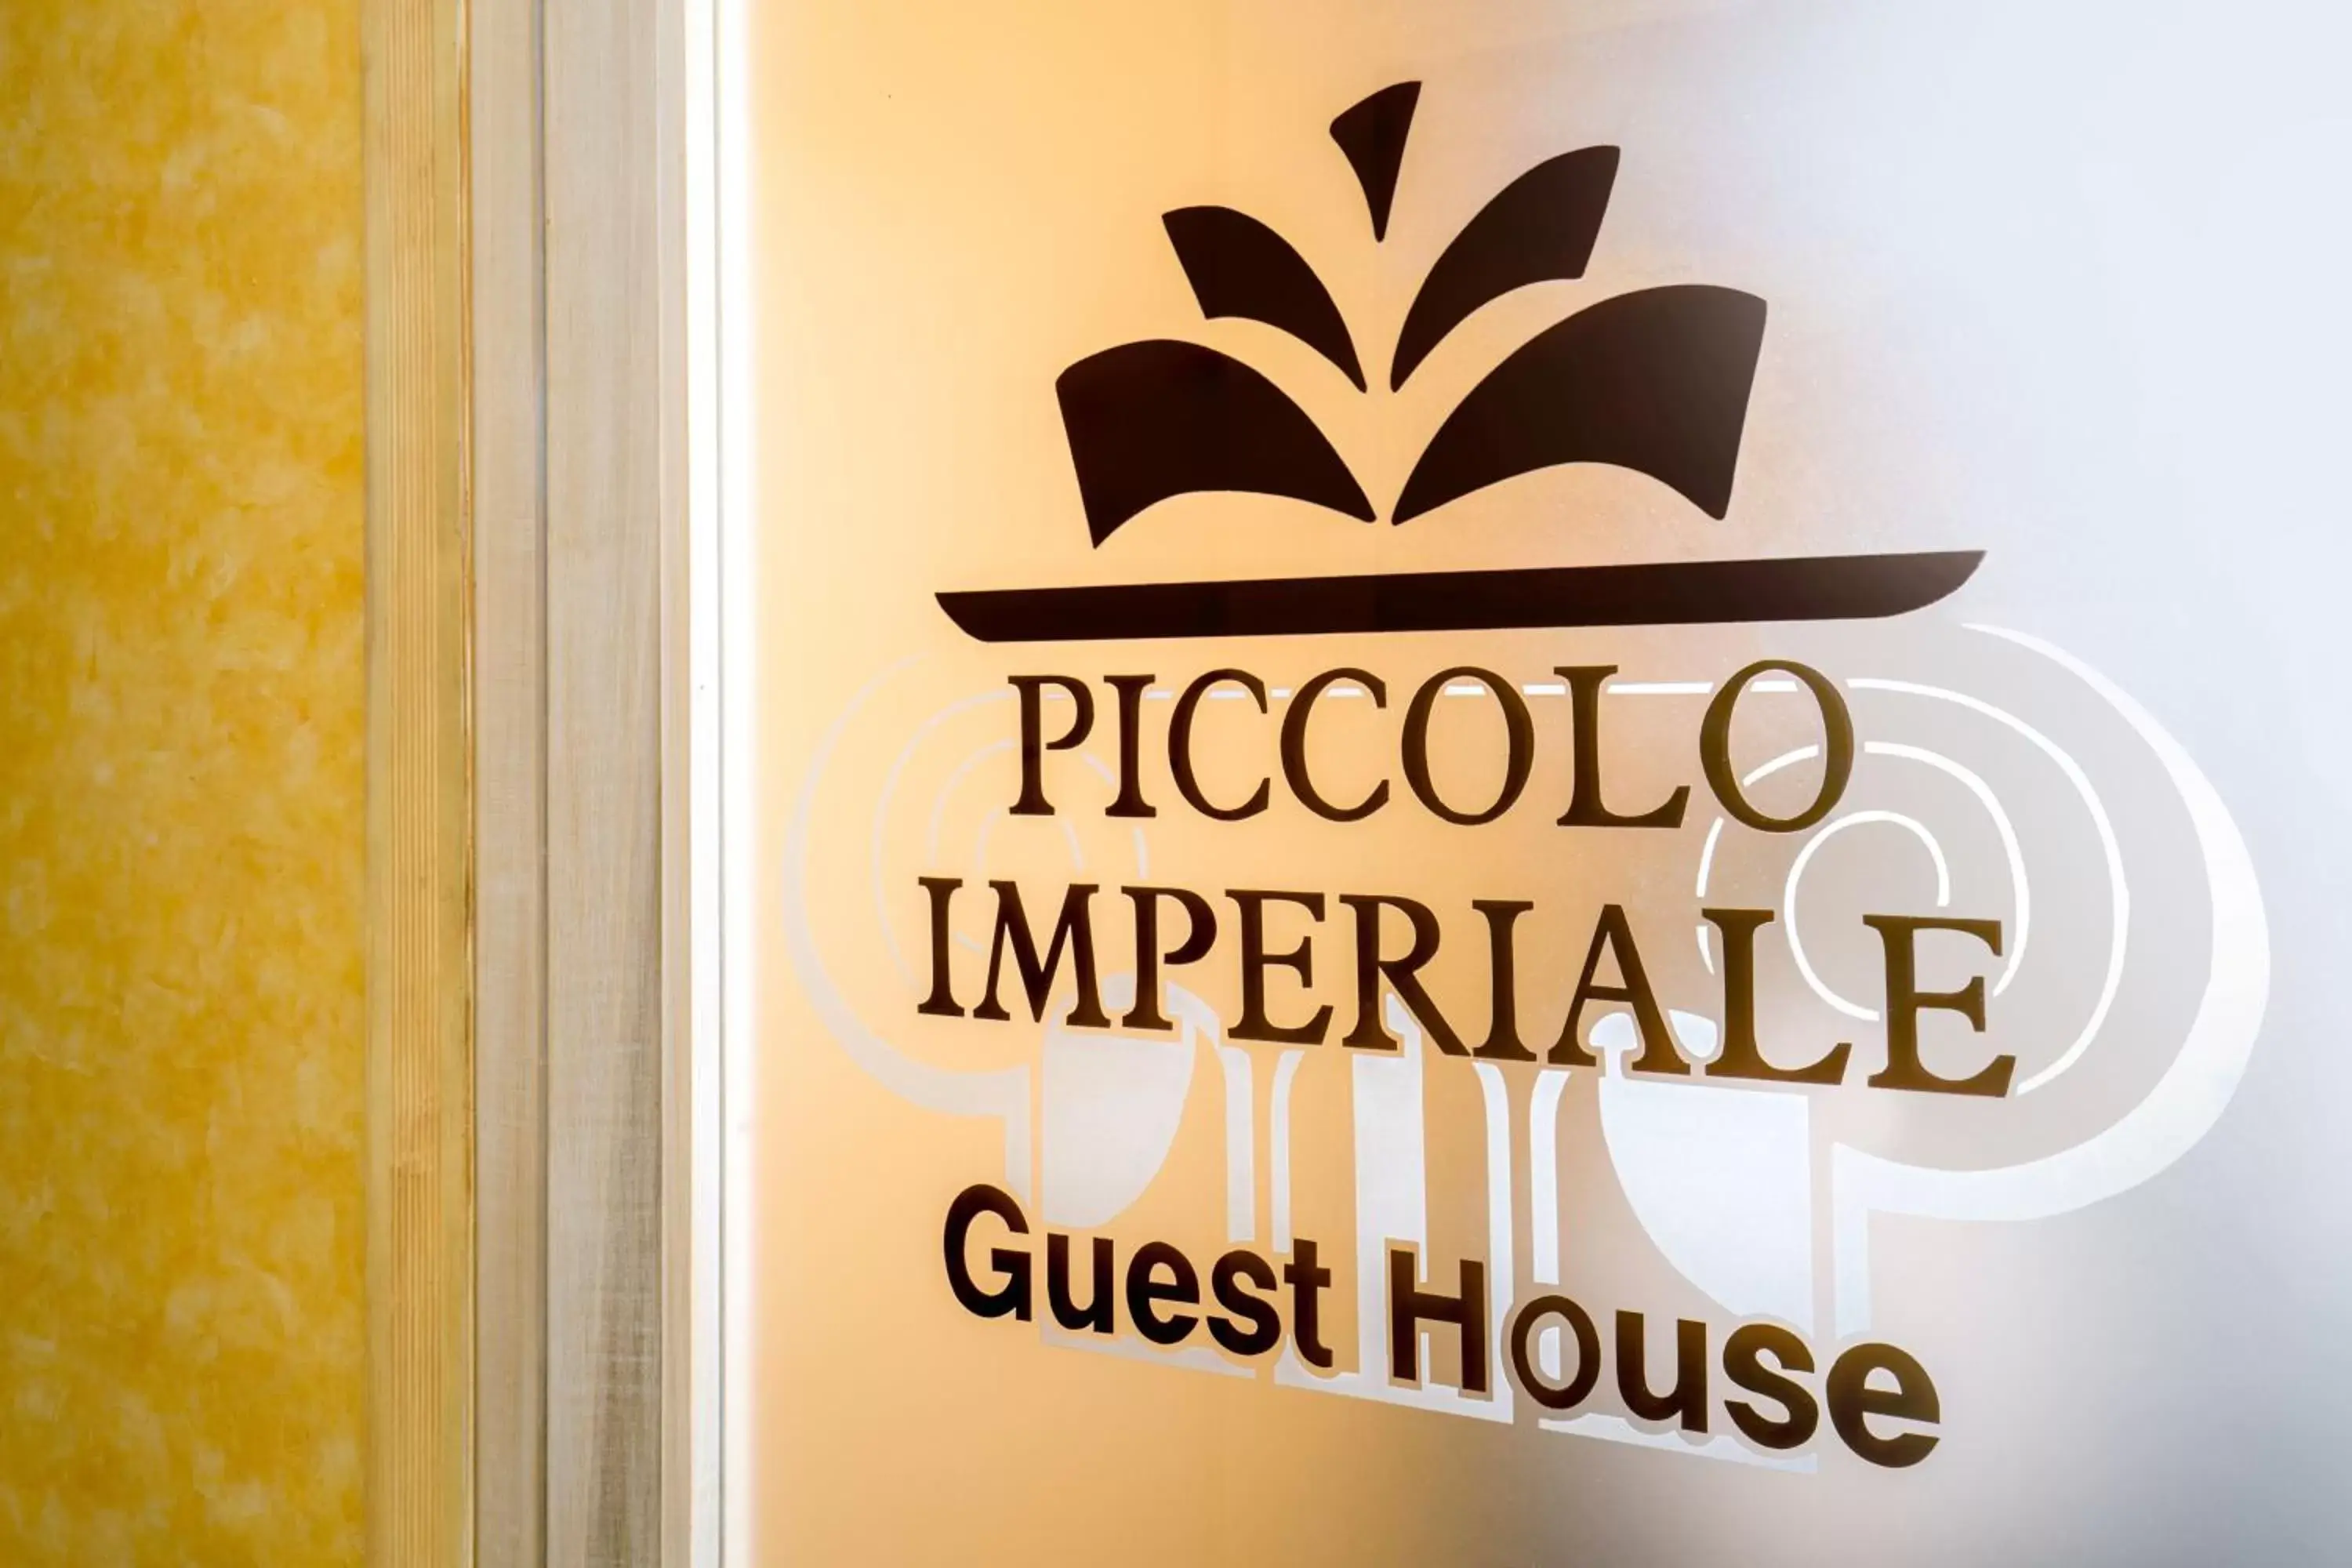 Property logo or sign in Piccolo Imperiale